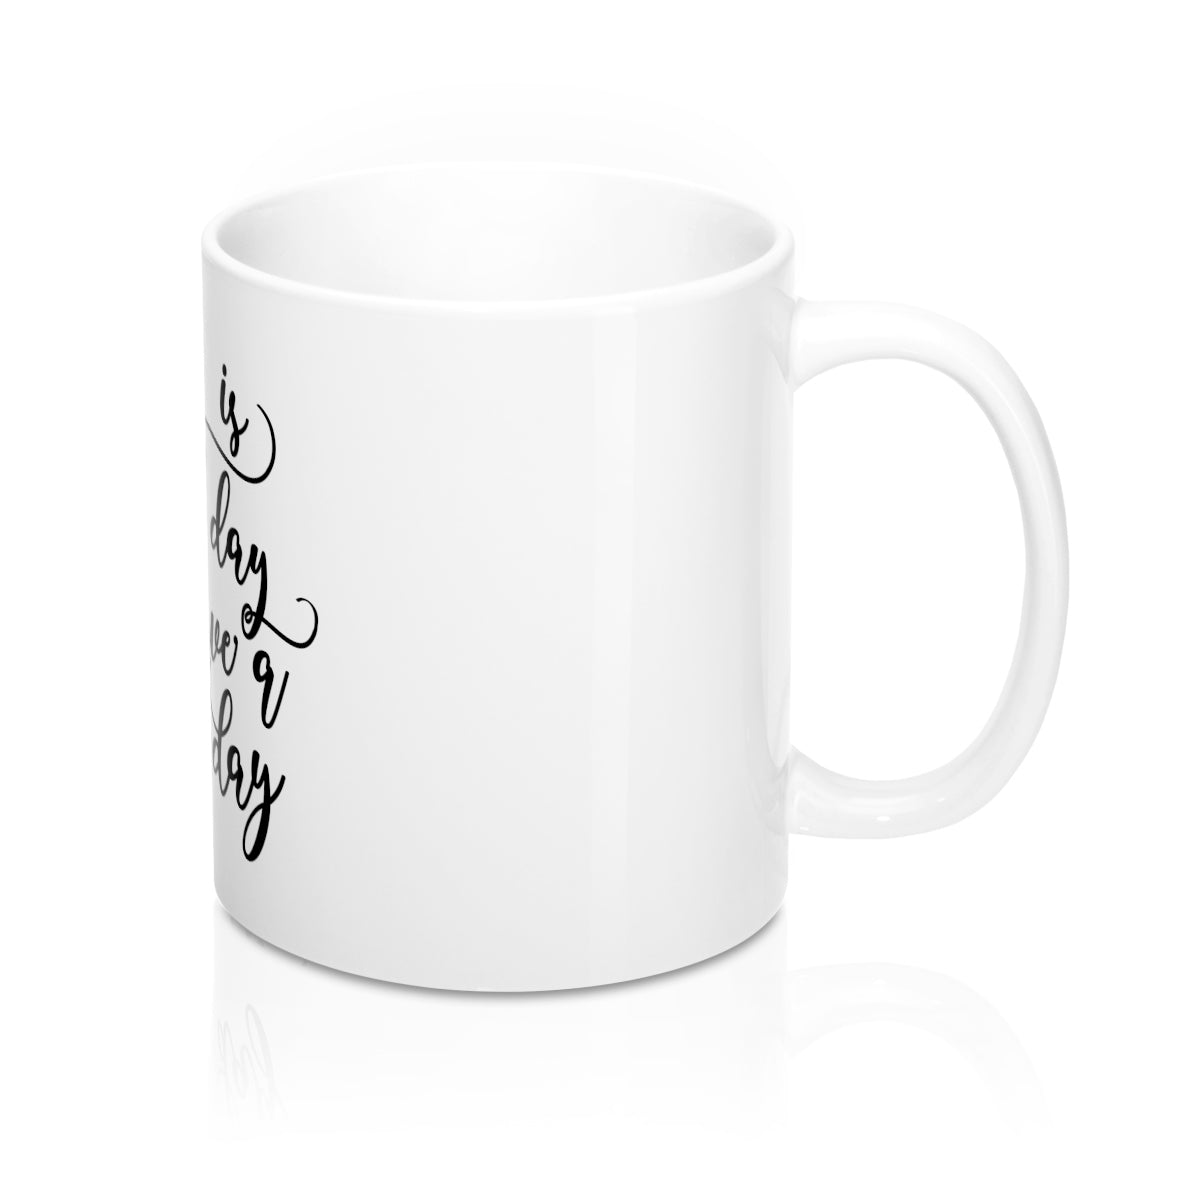 Today Is A Good Day To Have A Good Day 11oz Ceramic Mug - Inspired By Savy